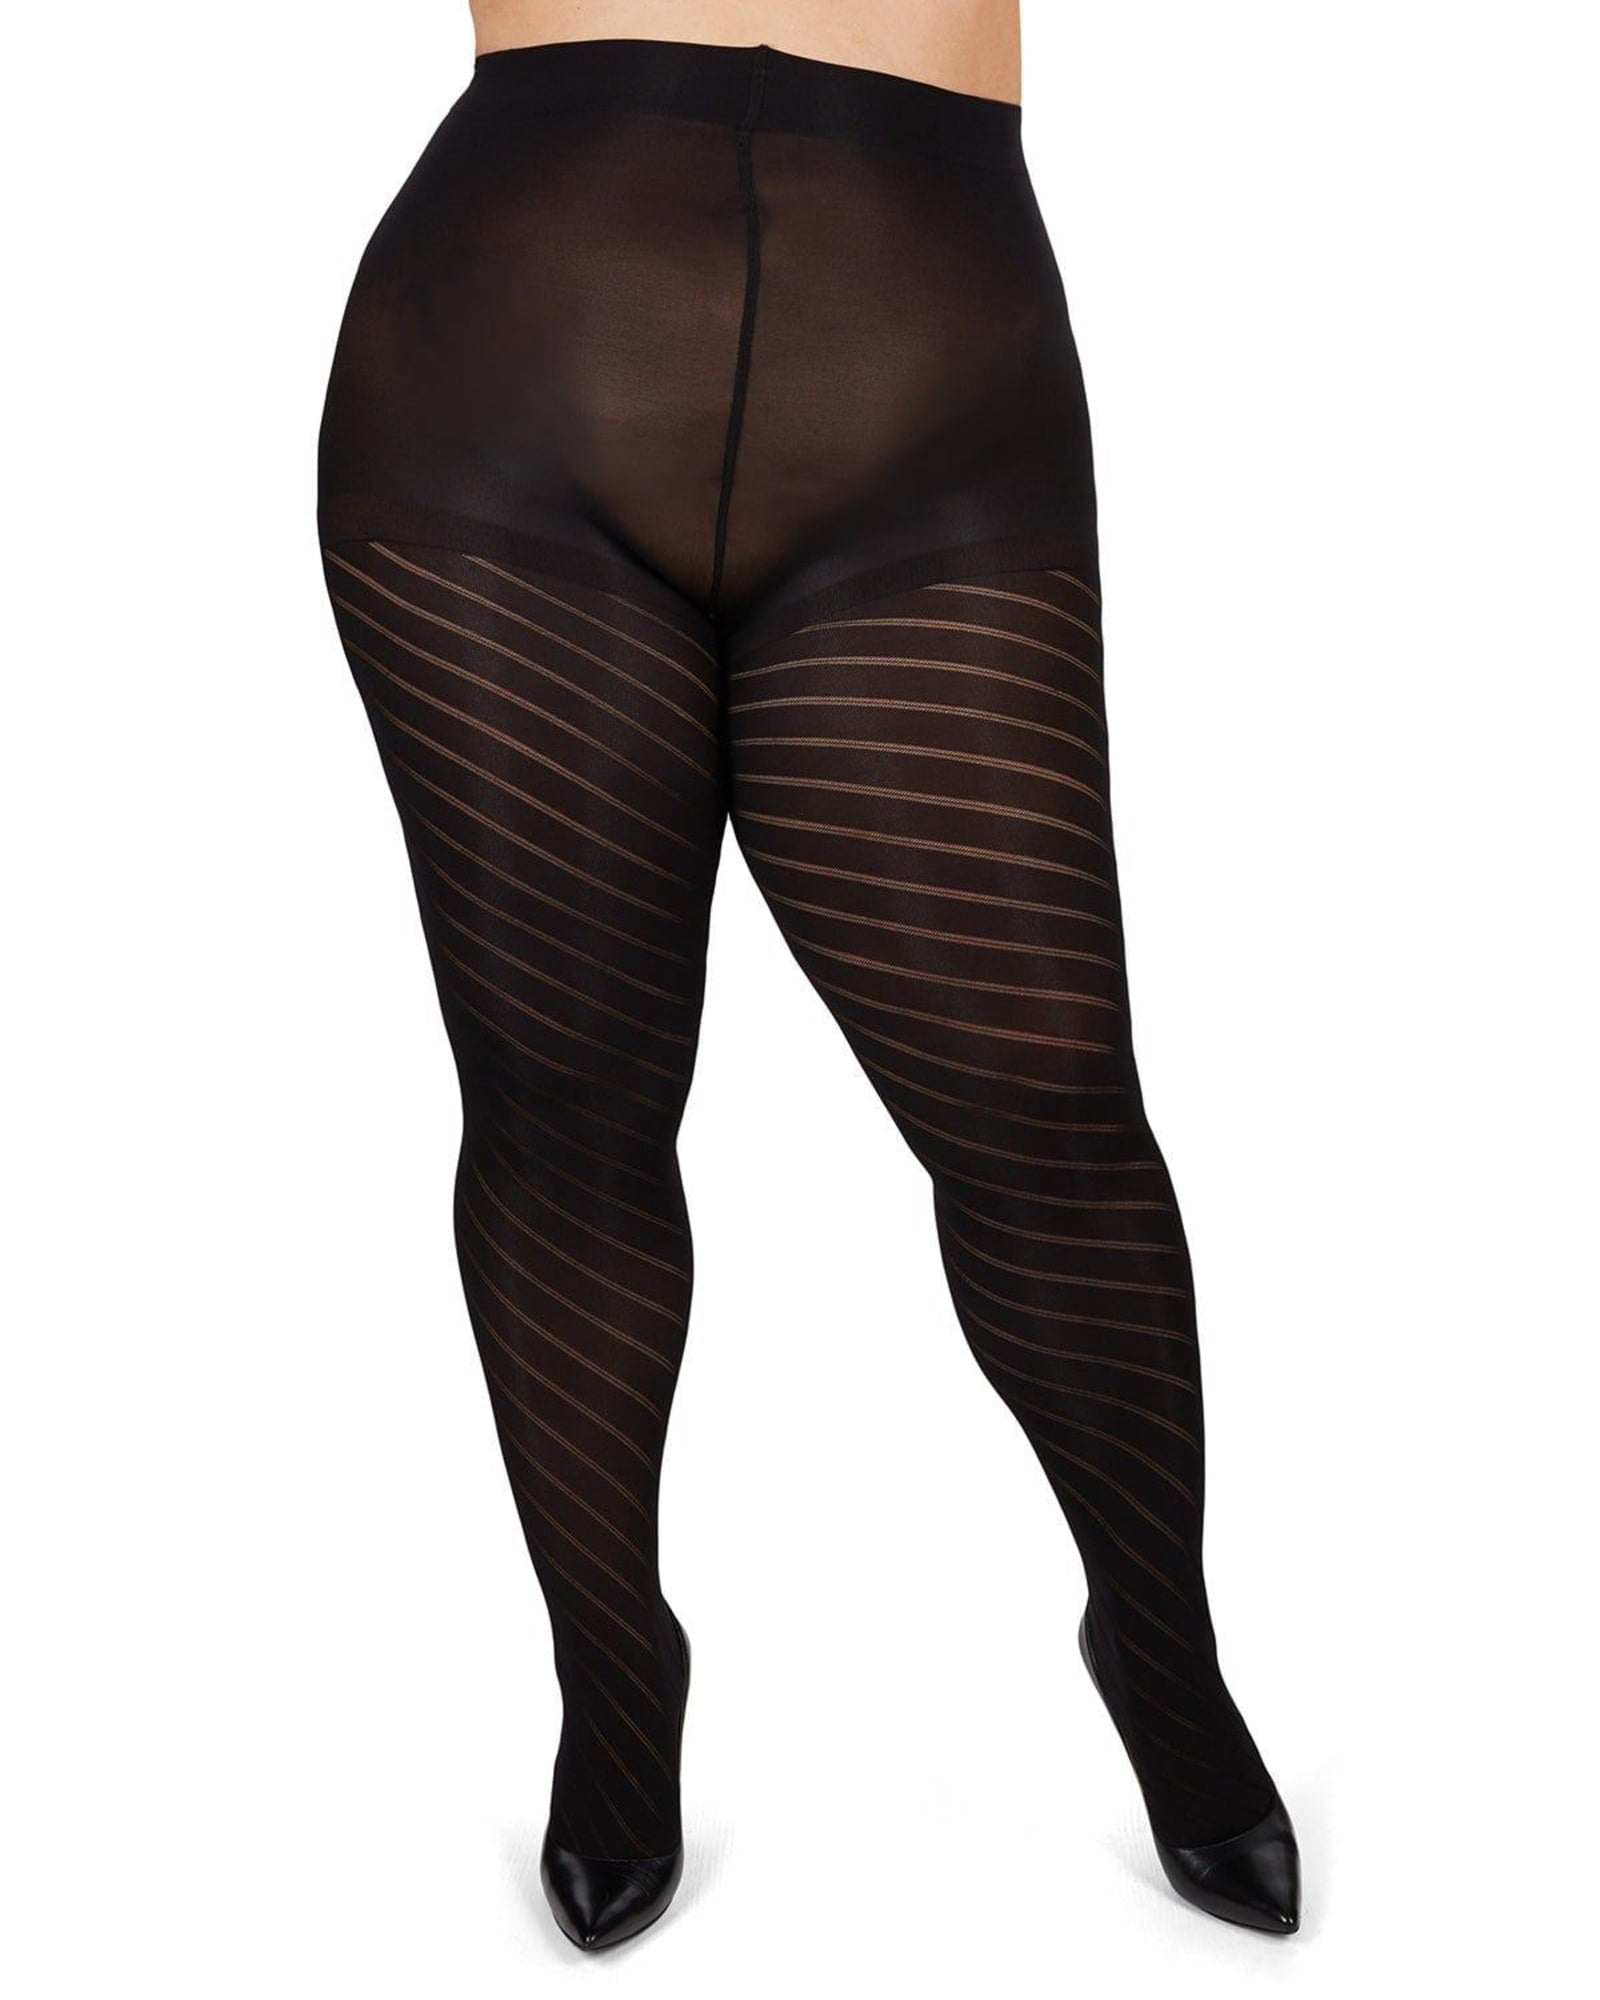 Hue Women's Striped Diamond Tights With Control Top